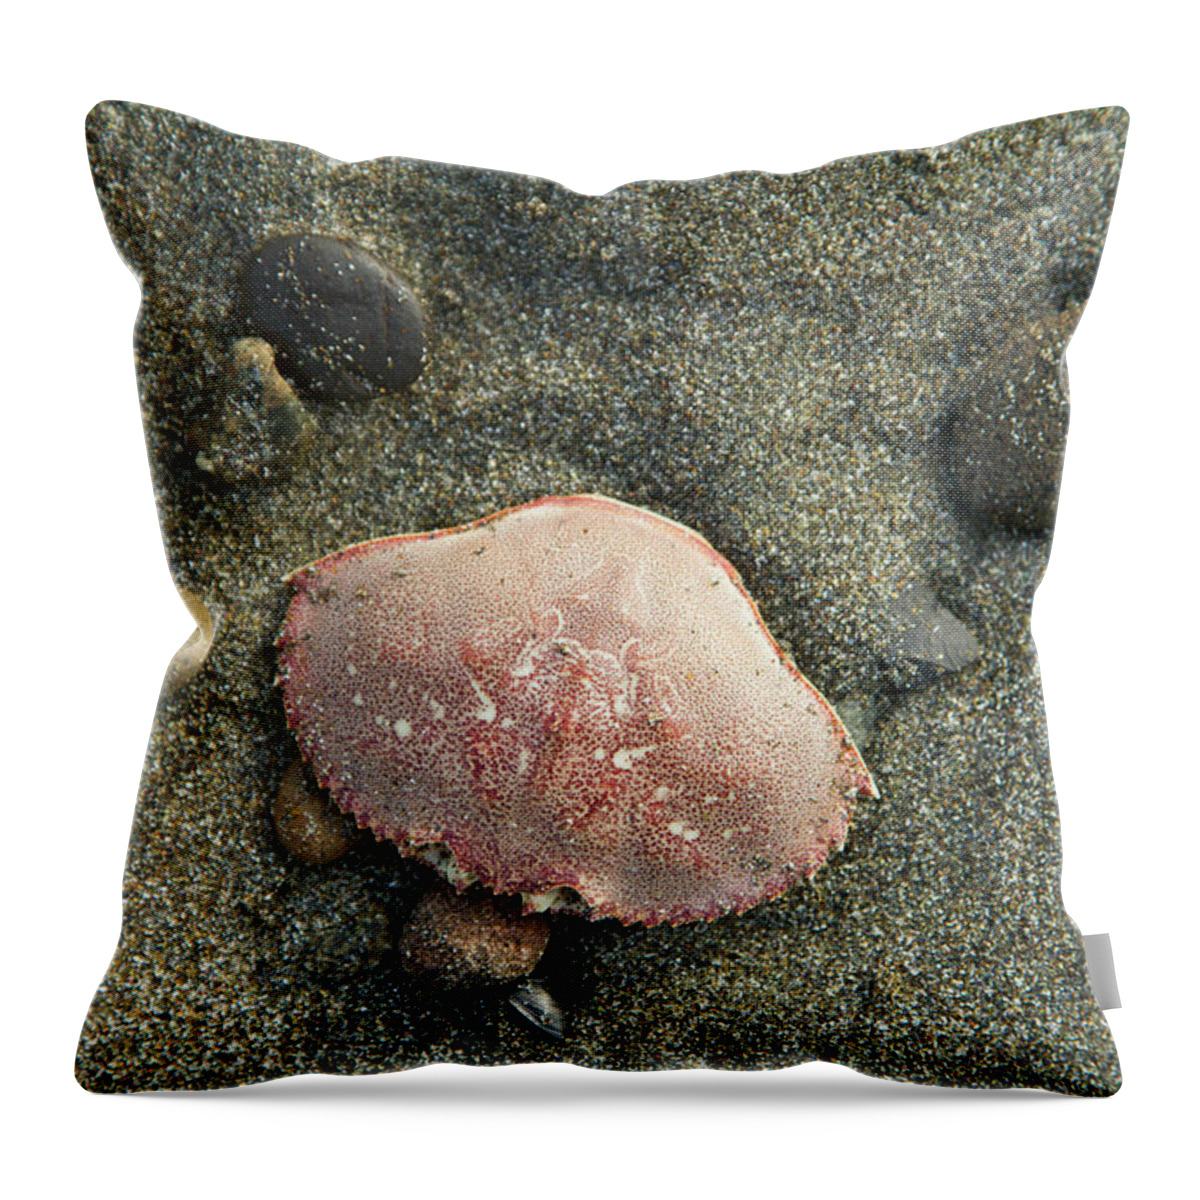 Animal Themes Throw Pillow featuring the photograph Shellfish On Pacific Northwest Coast #1 by Justin Bailie